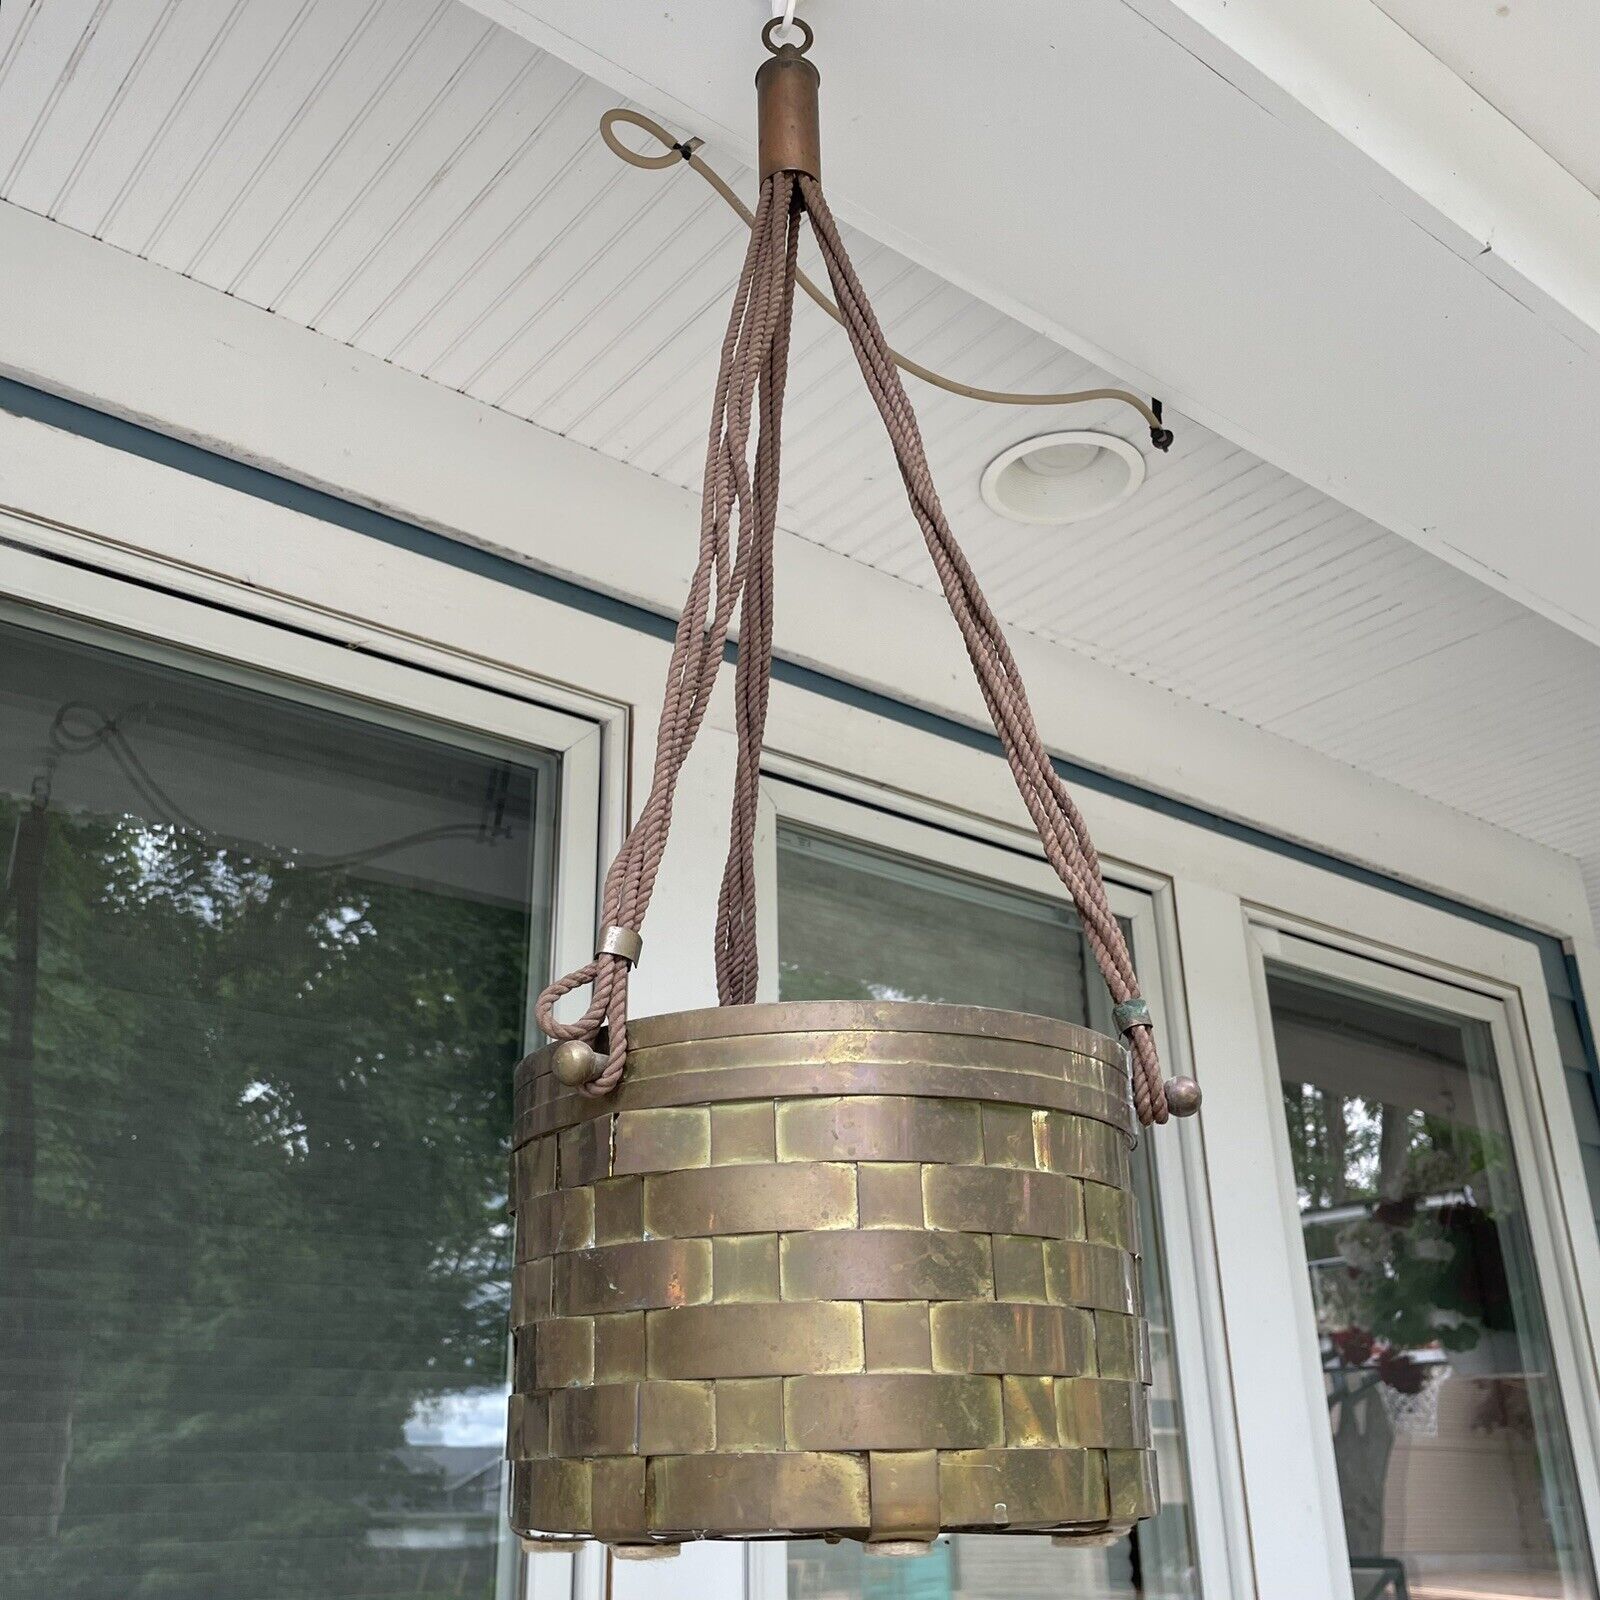 Large Brass Hanging Woven Basket Planter Ropes And Brass Hook Topper 8.5” X 11”